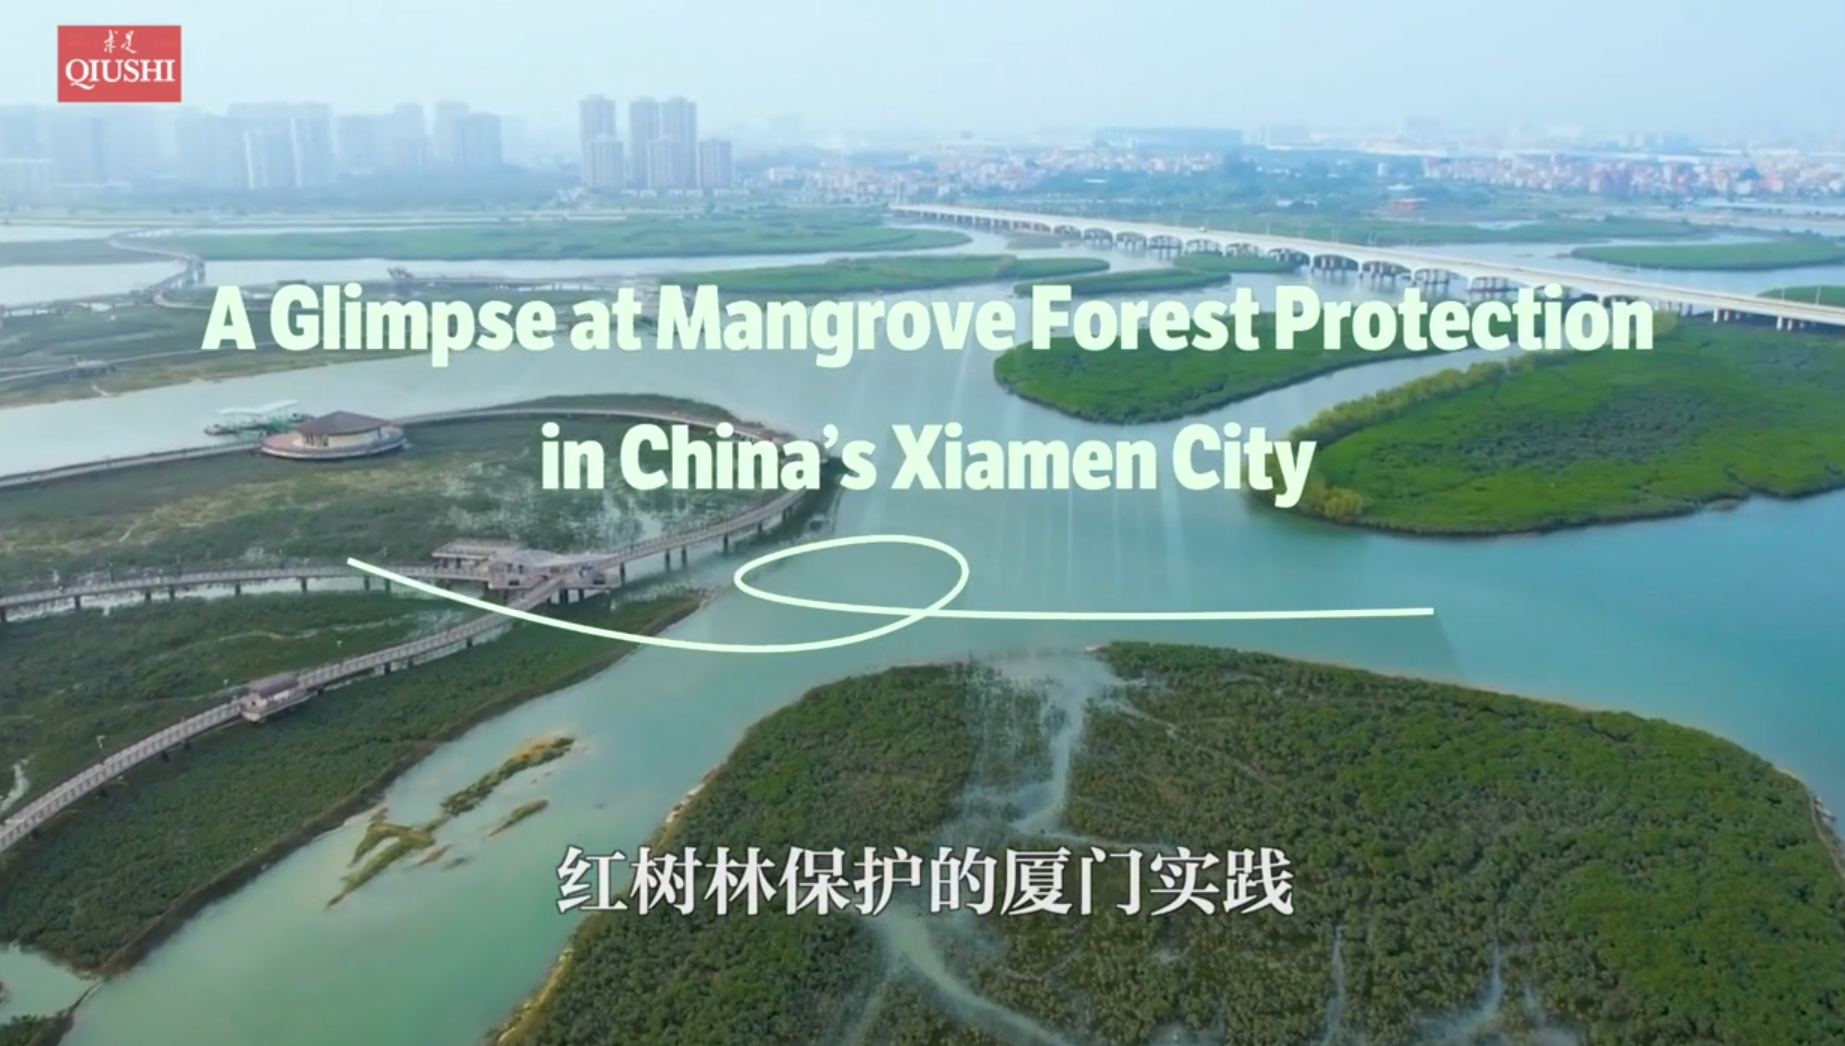 A Glimpse at Mangrove Forest Protection in China’s Xiamen City